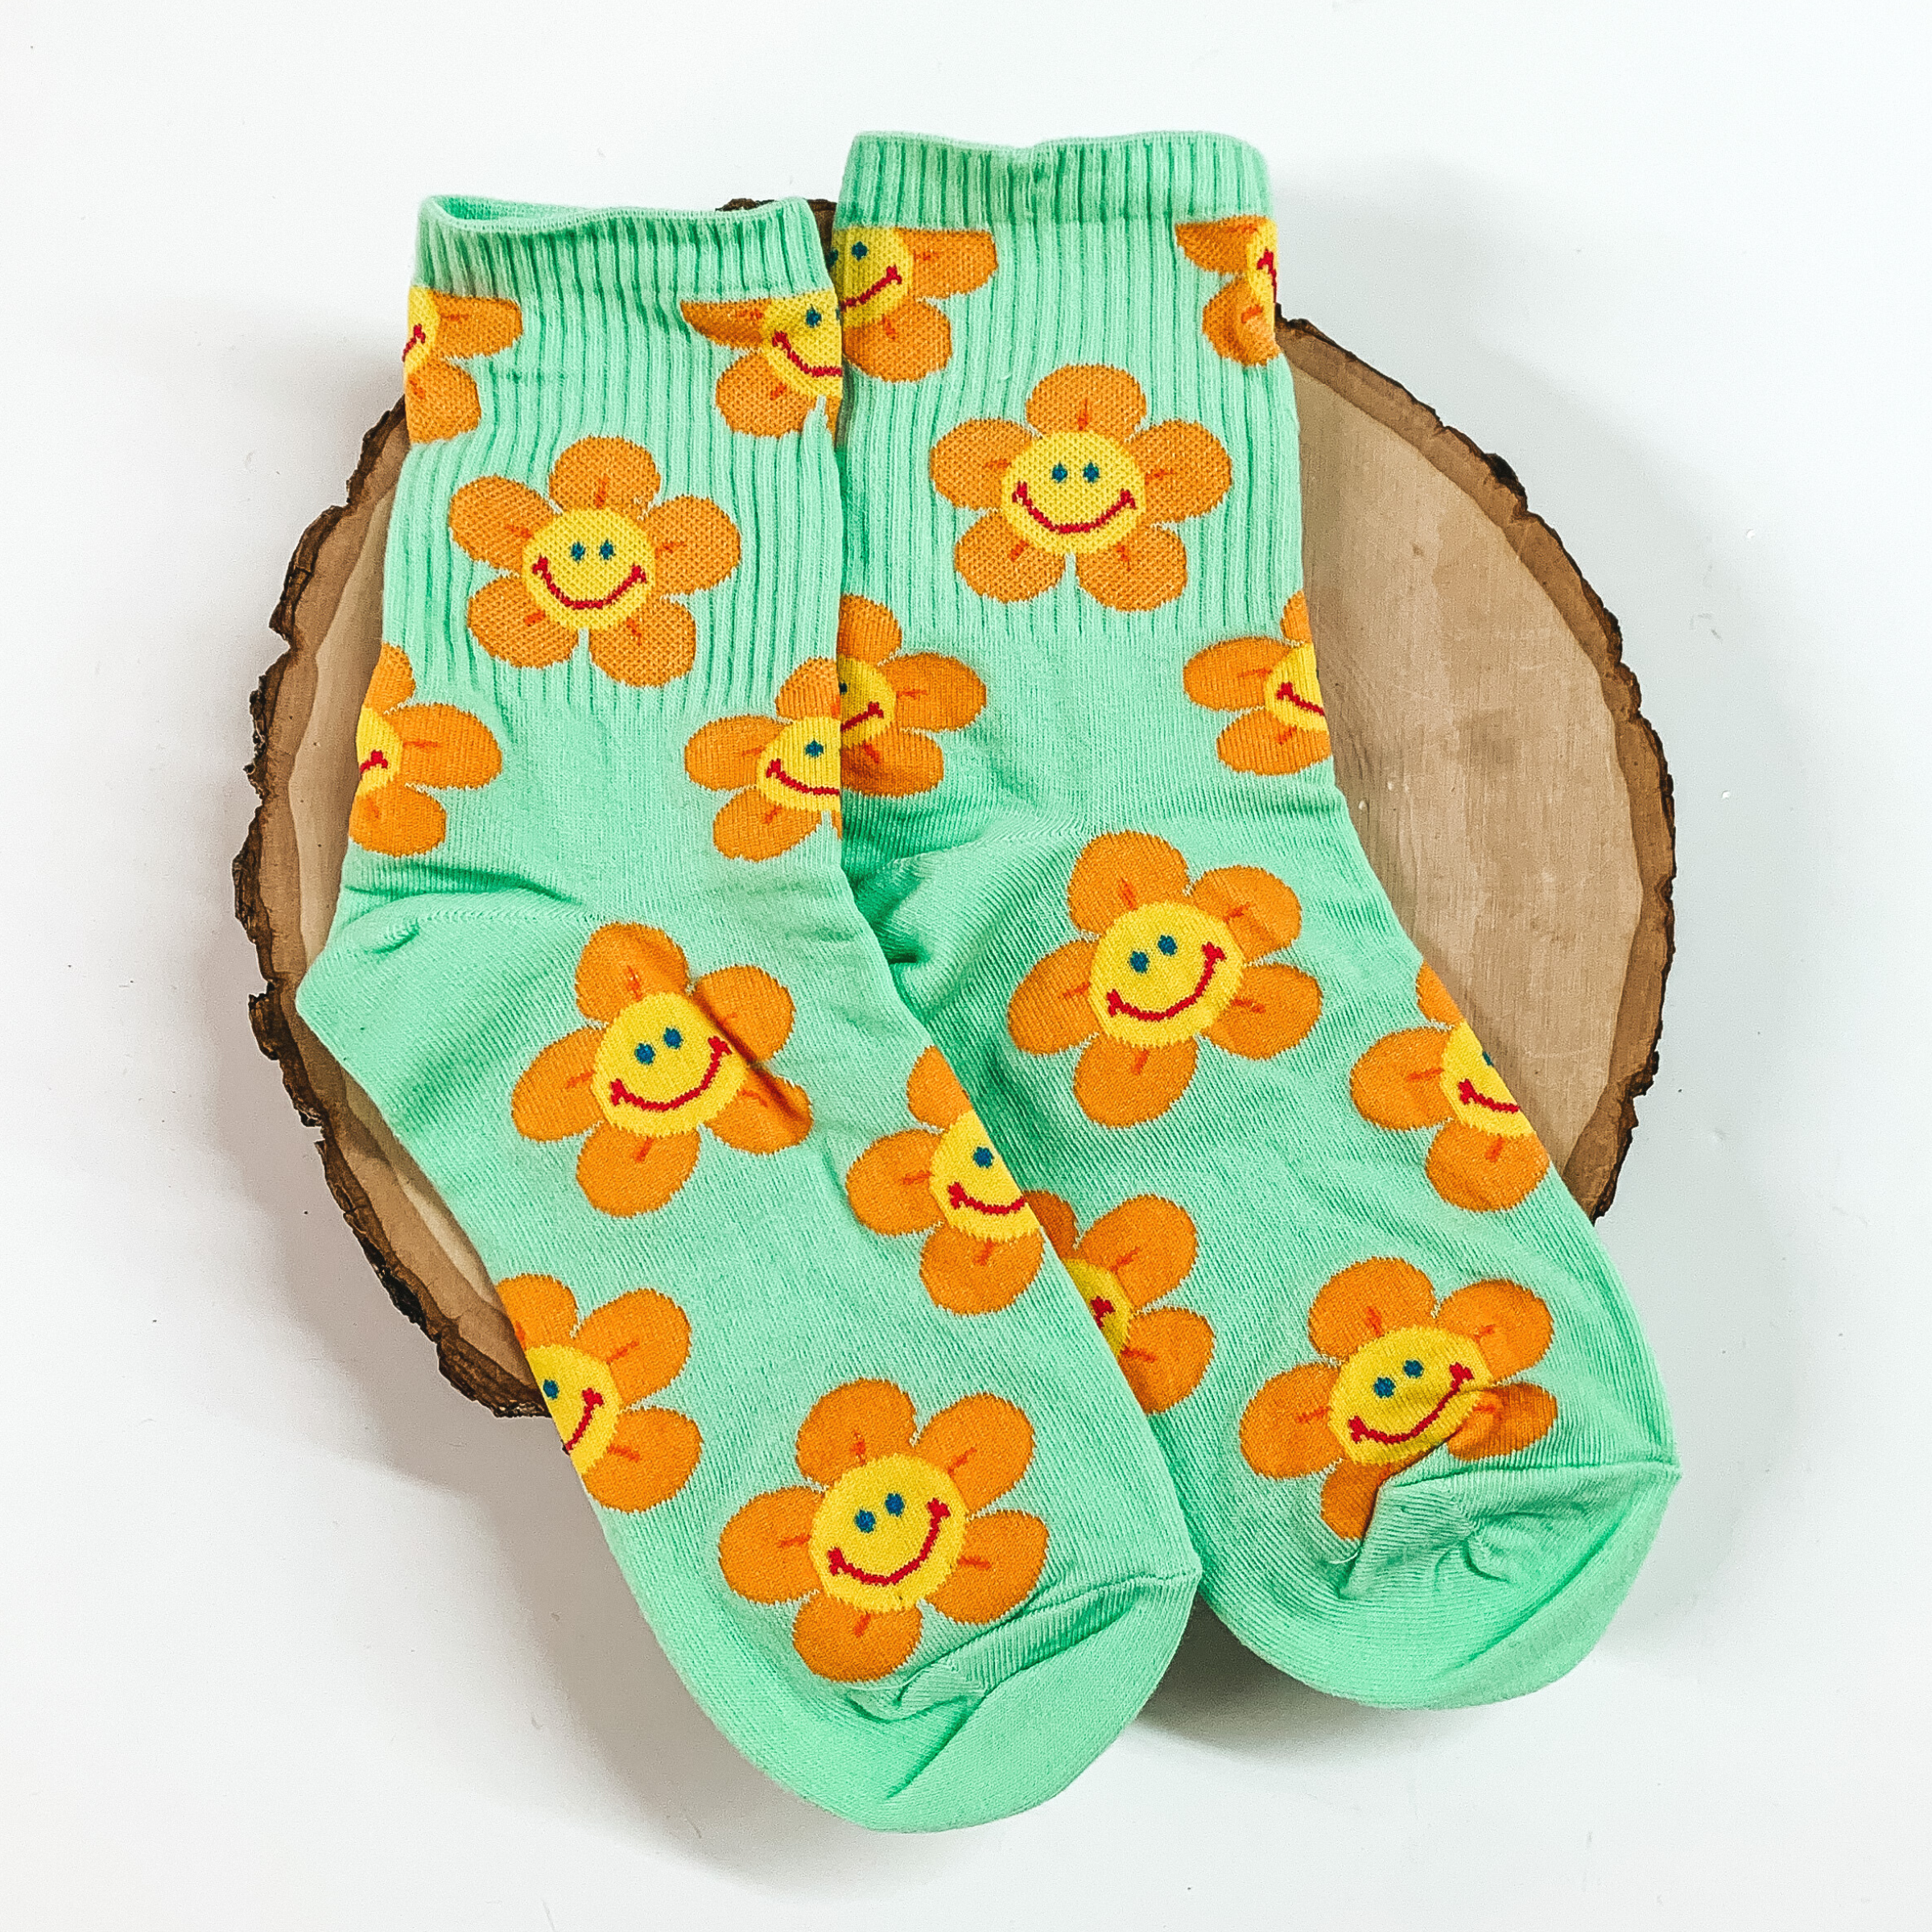 Mint ankle socks with an orange flower design. The flowers include a smiley face in the center. These socks are pictured on a piece of wood on a white background. 